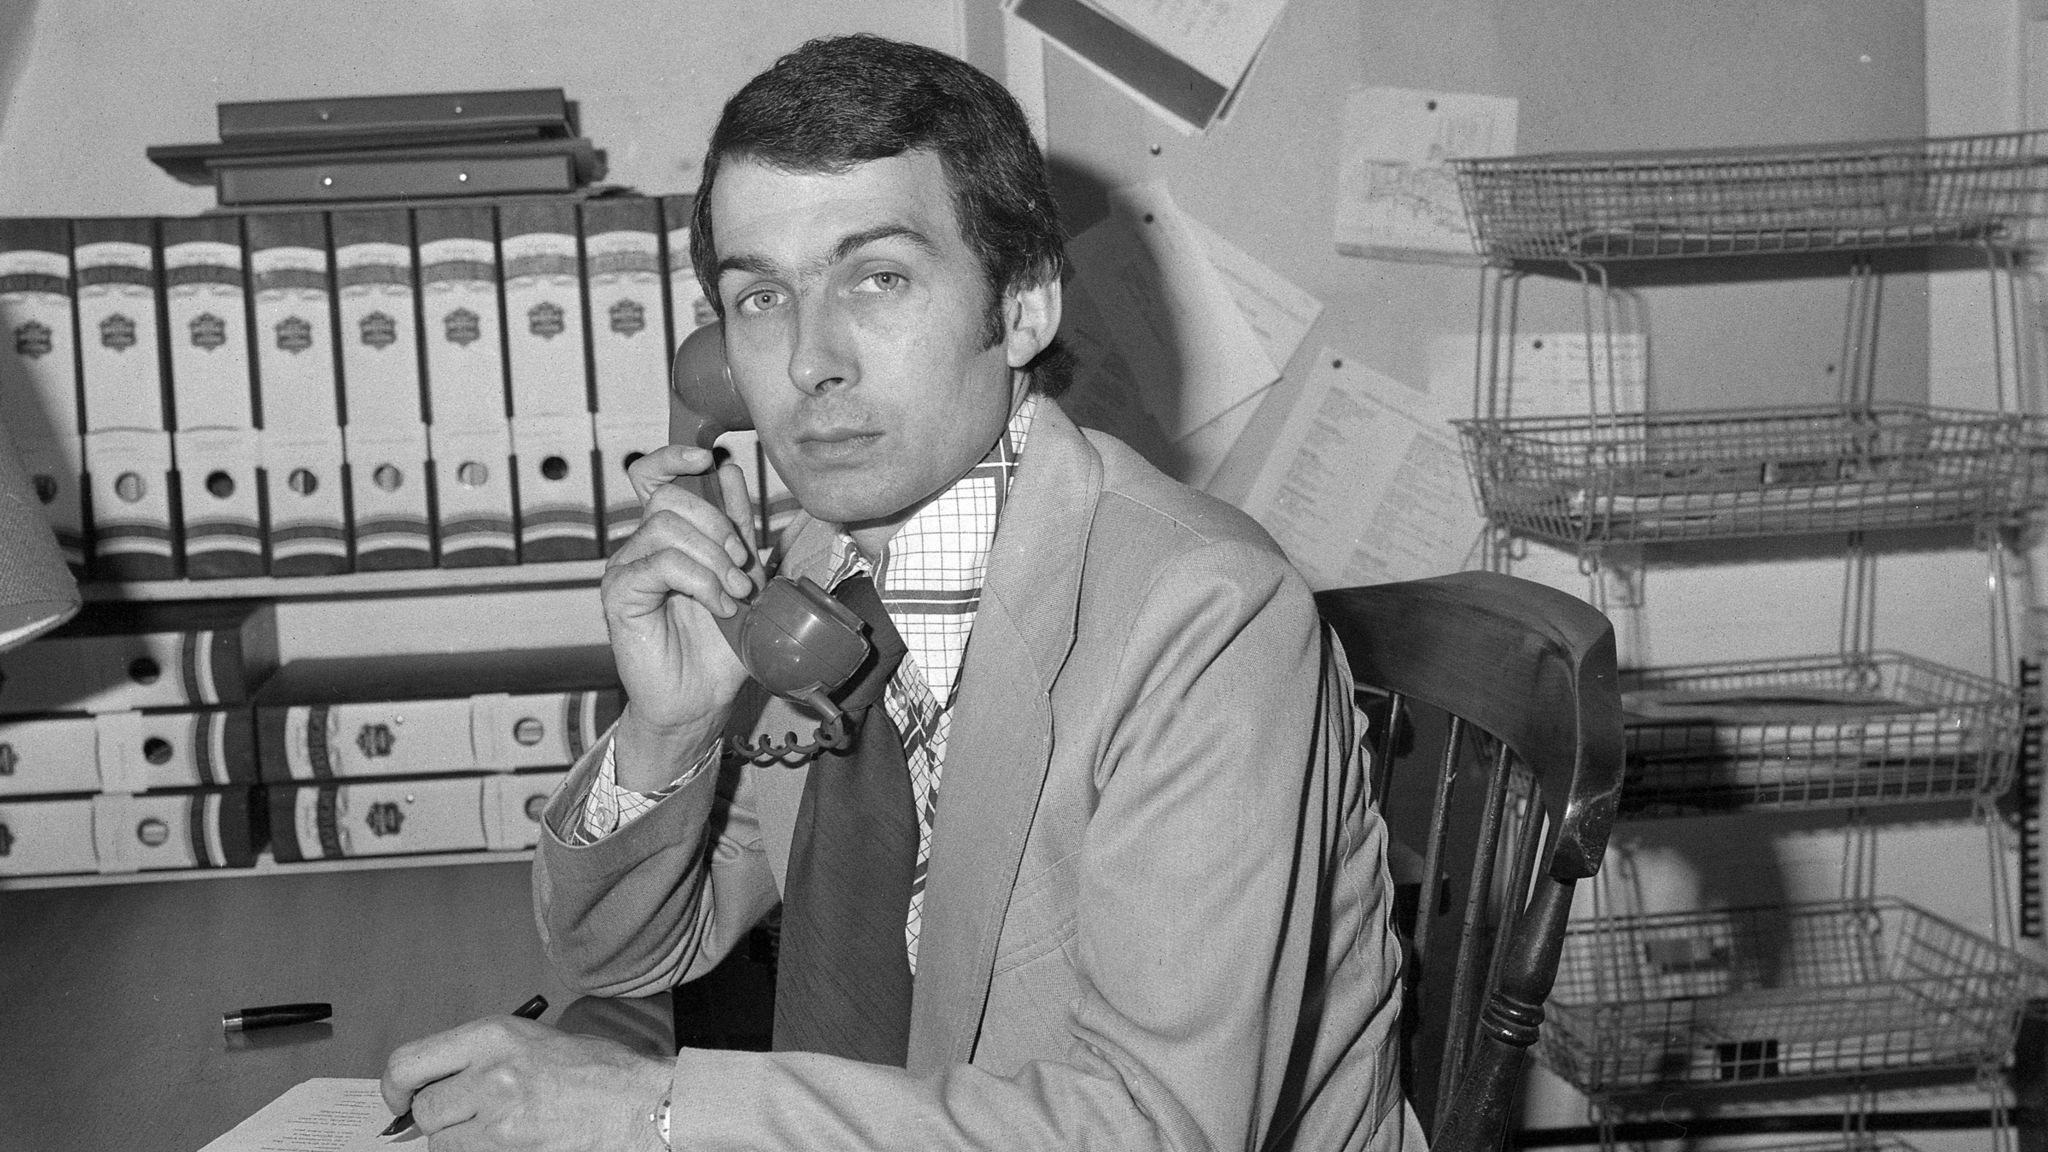 Field pictured in his office in 1976 on the telephone